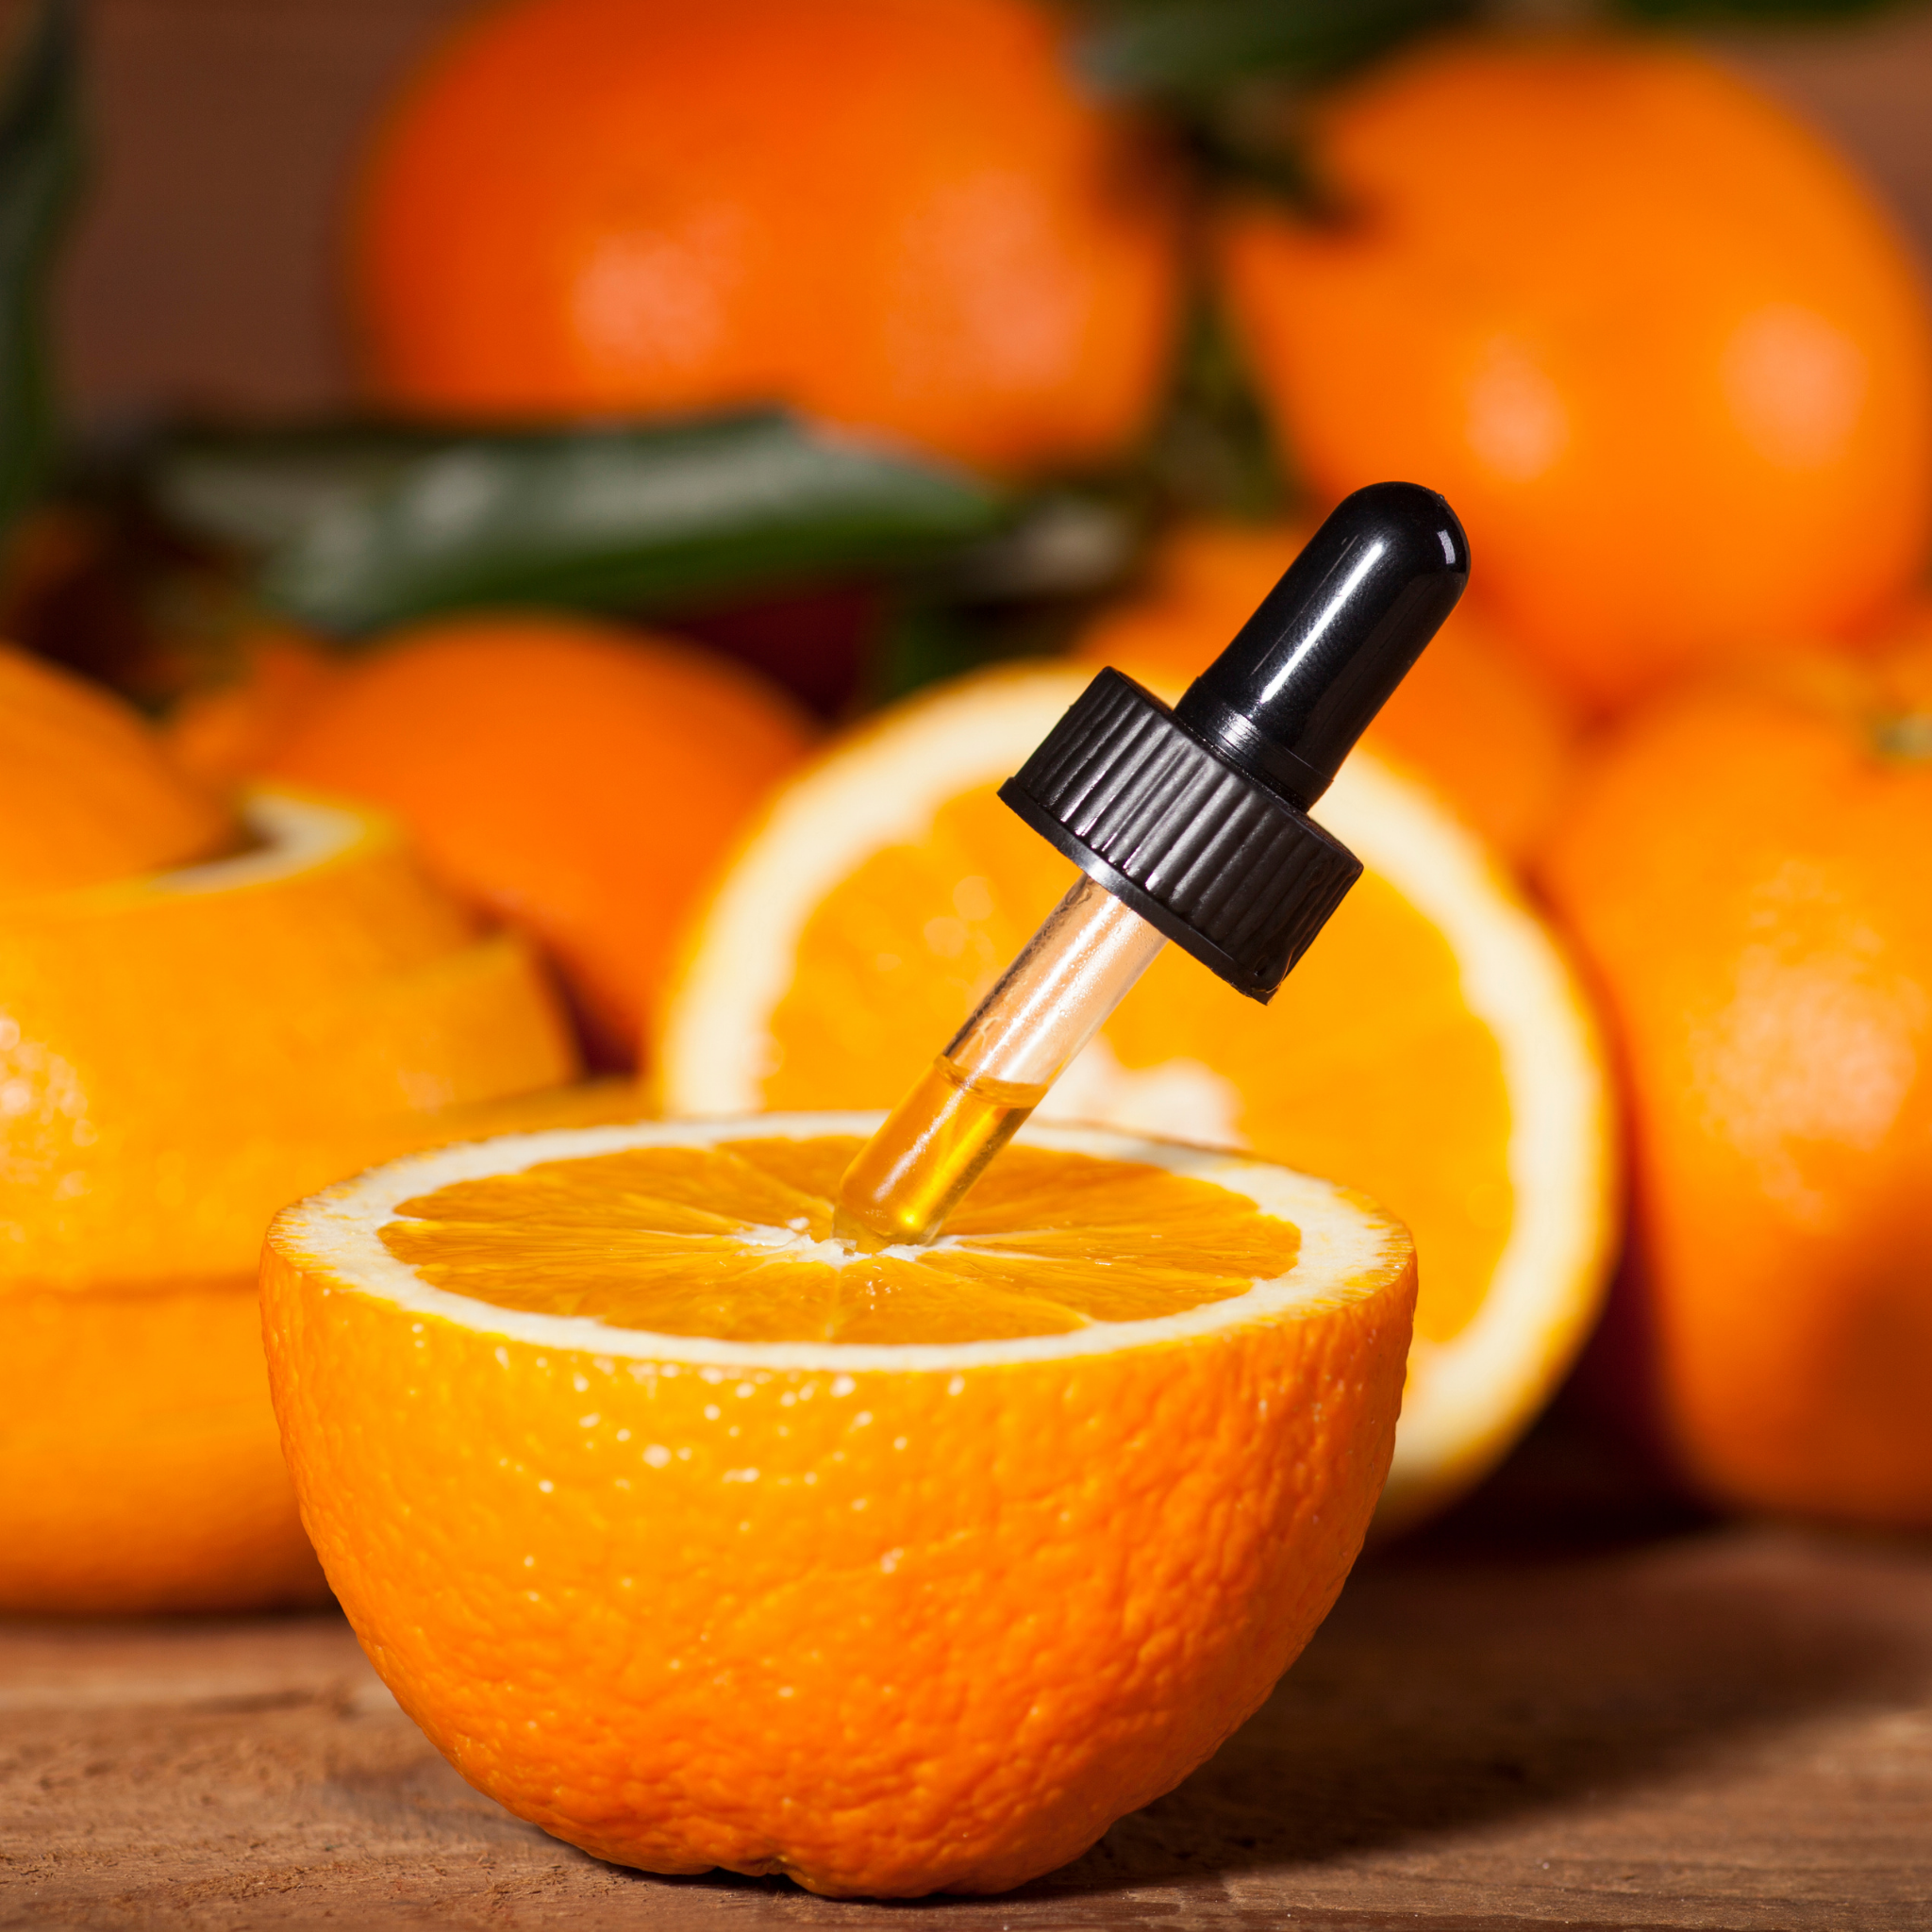 Orange Essential Oil Benefits, Uses, & Recipes - Simply Earth Blog